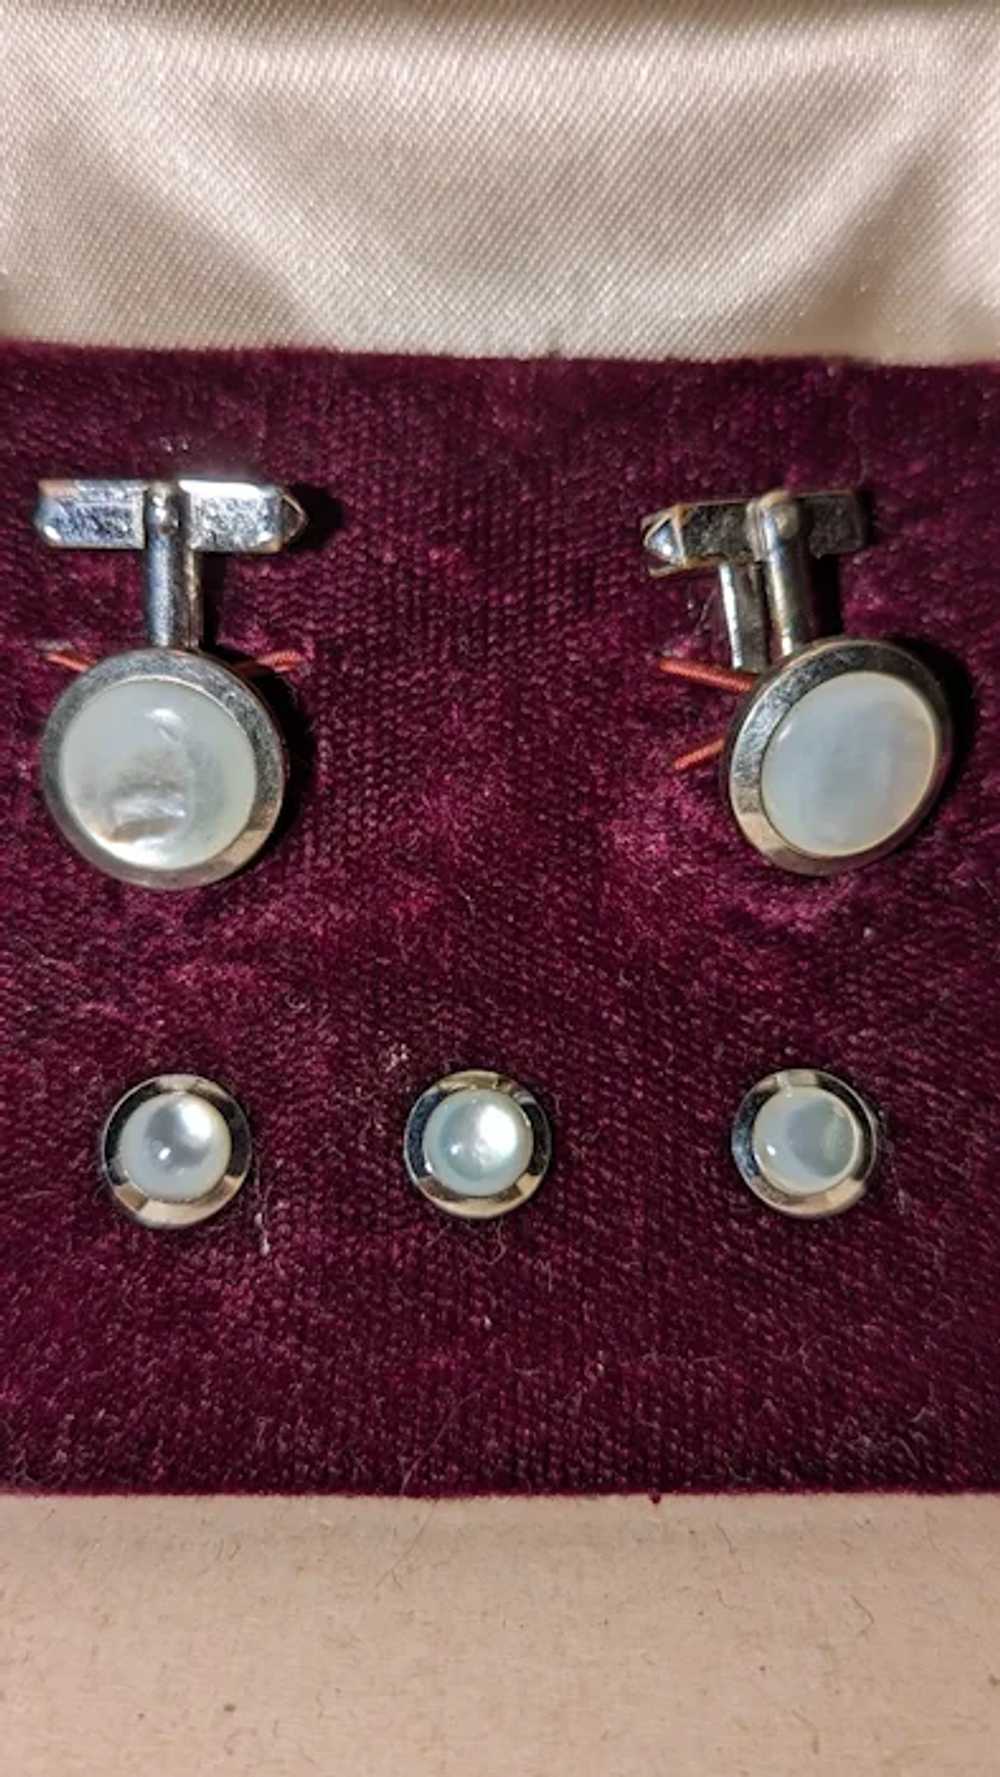 Swank Mother of Pearl Cuff Links and Stud Set - image 3